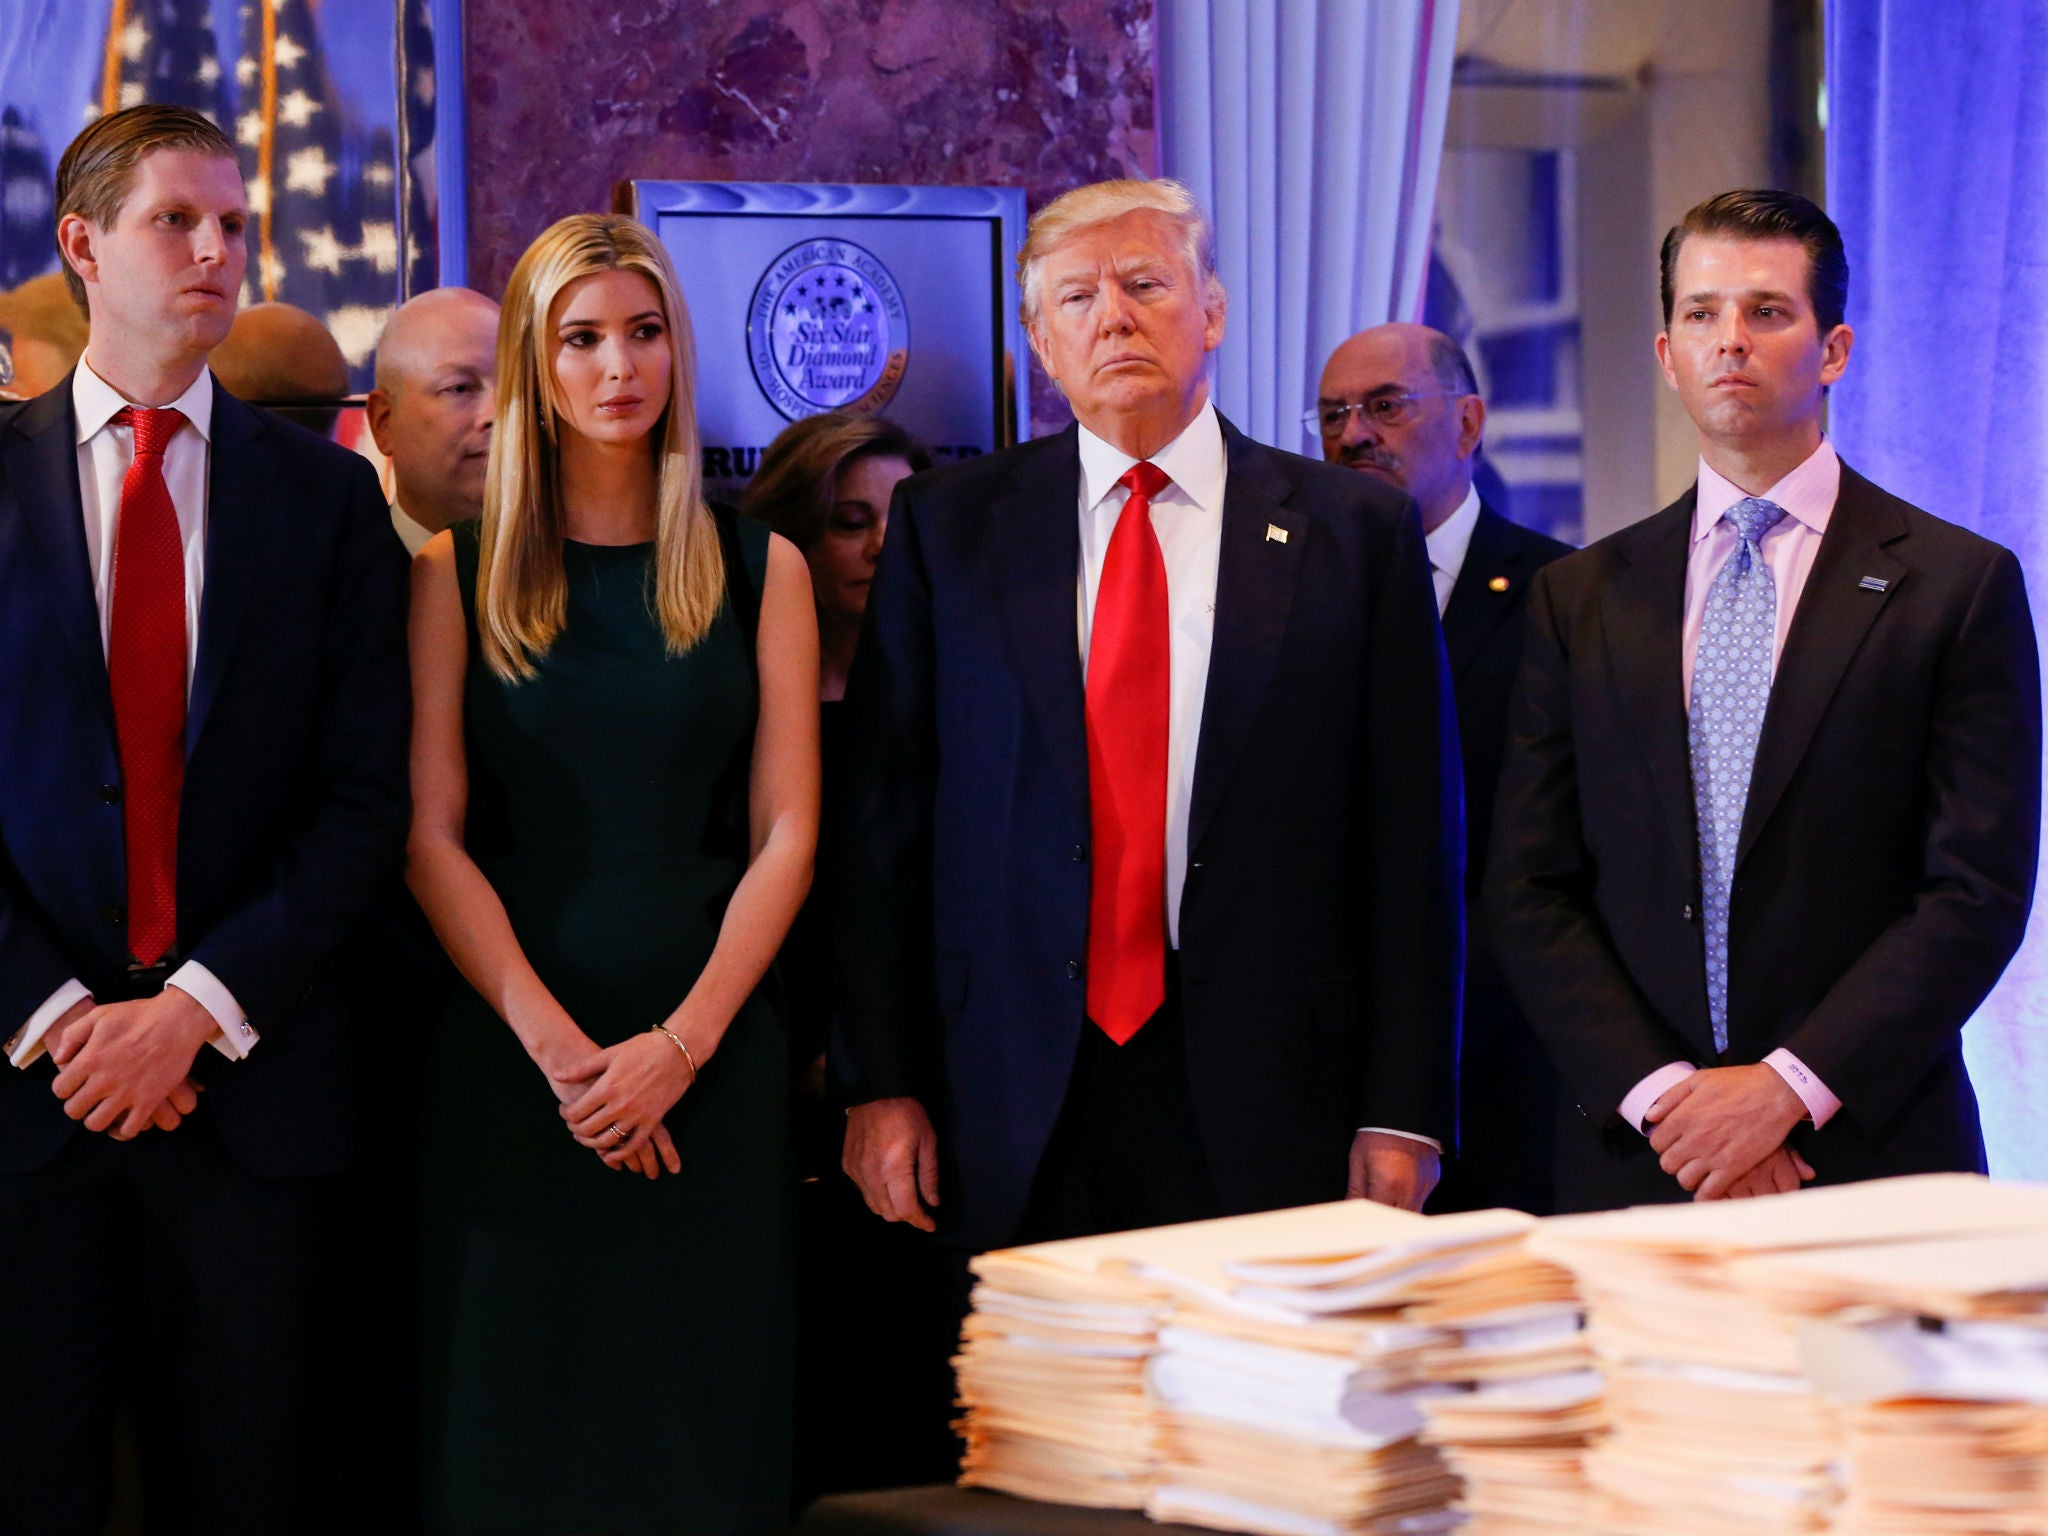 Donald Trump surrounded by his son Eric, left, plus his daughter Ivanka and son Donald Jr, right.